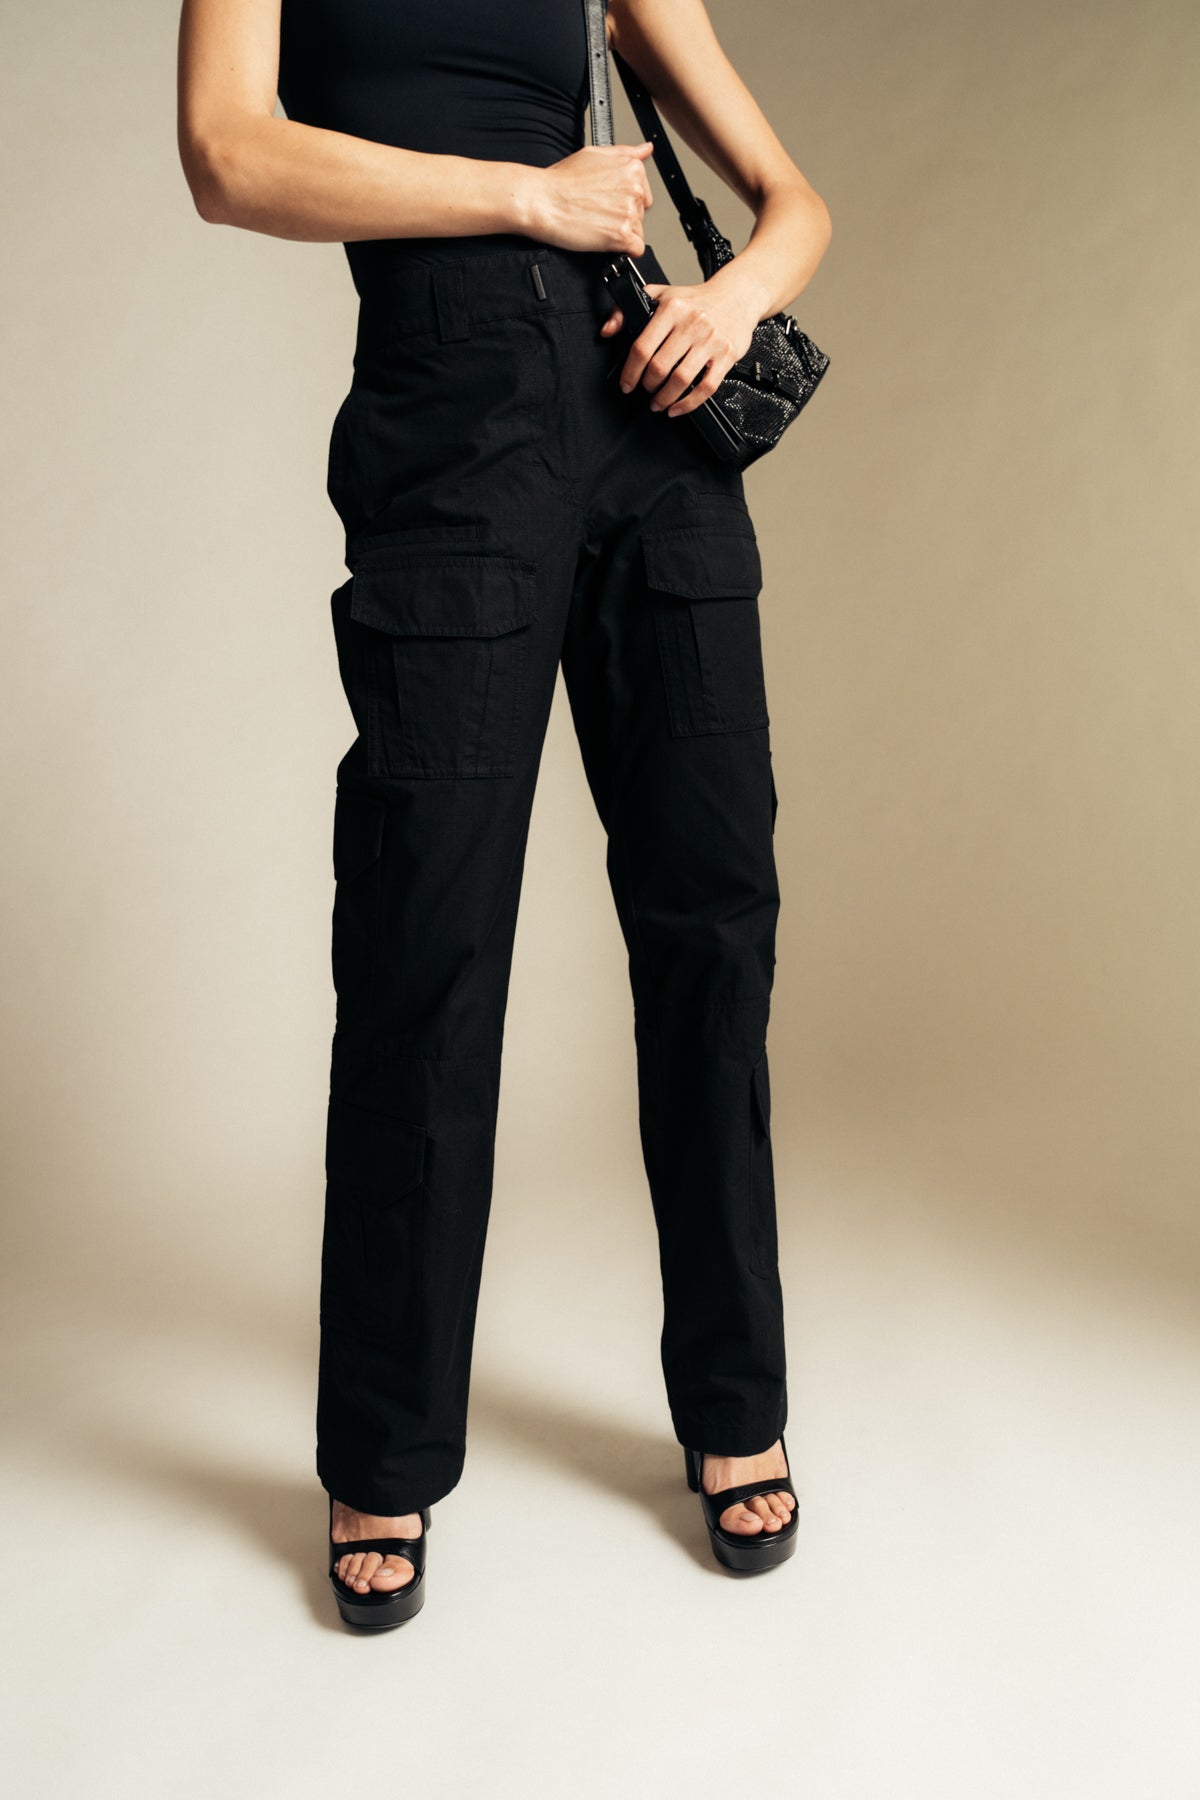 Black Slim-Fit Cargo Pants by Givenchy on Sale